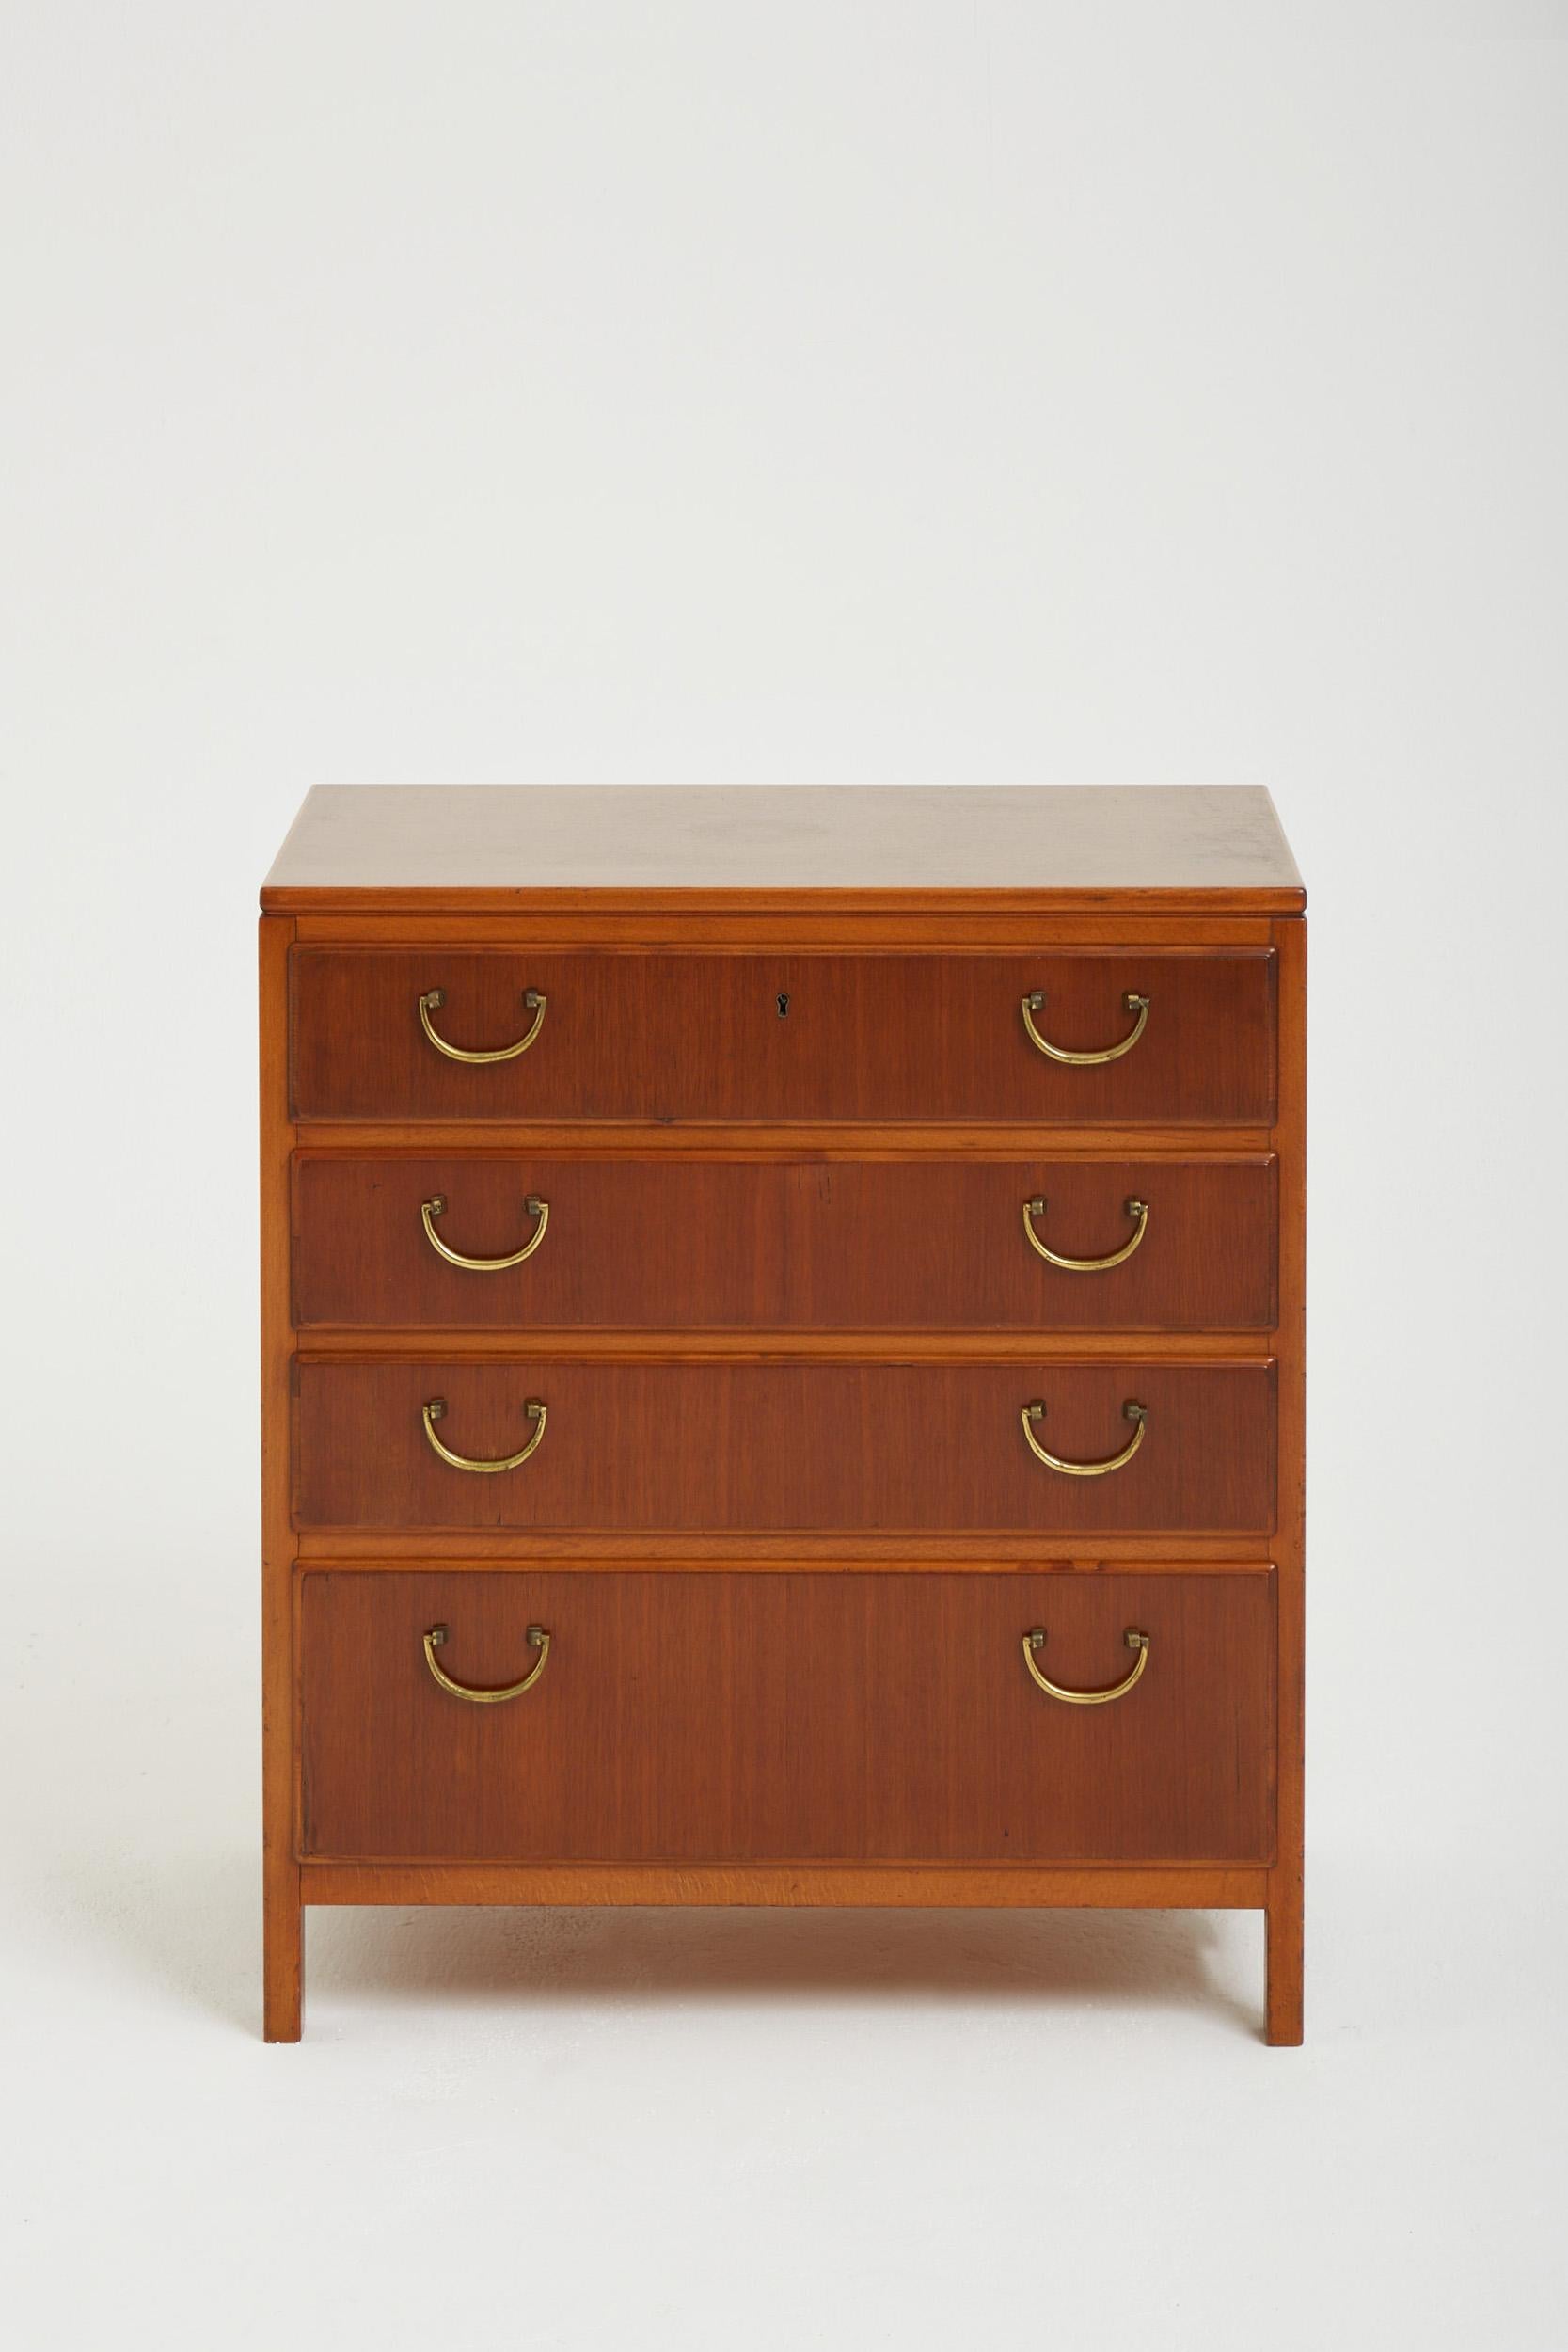 Pair of Bedside Chests of Drawers by David Rosen for Nordiska Kompaniet 1